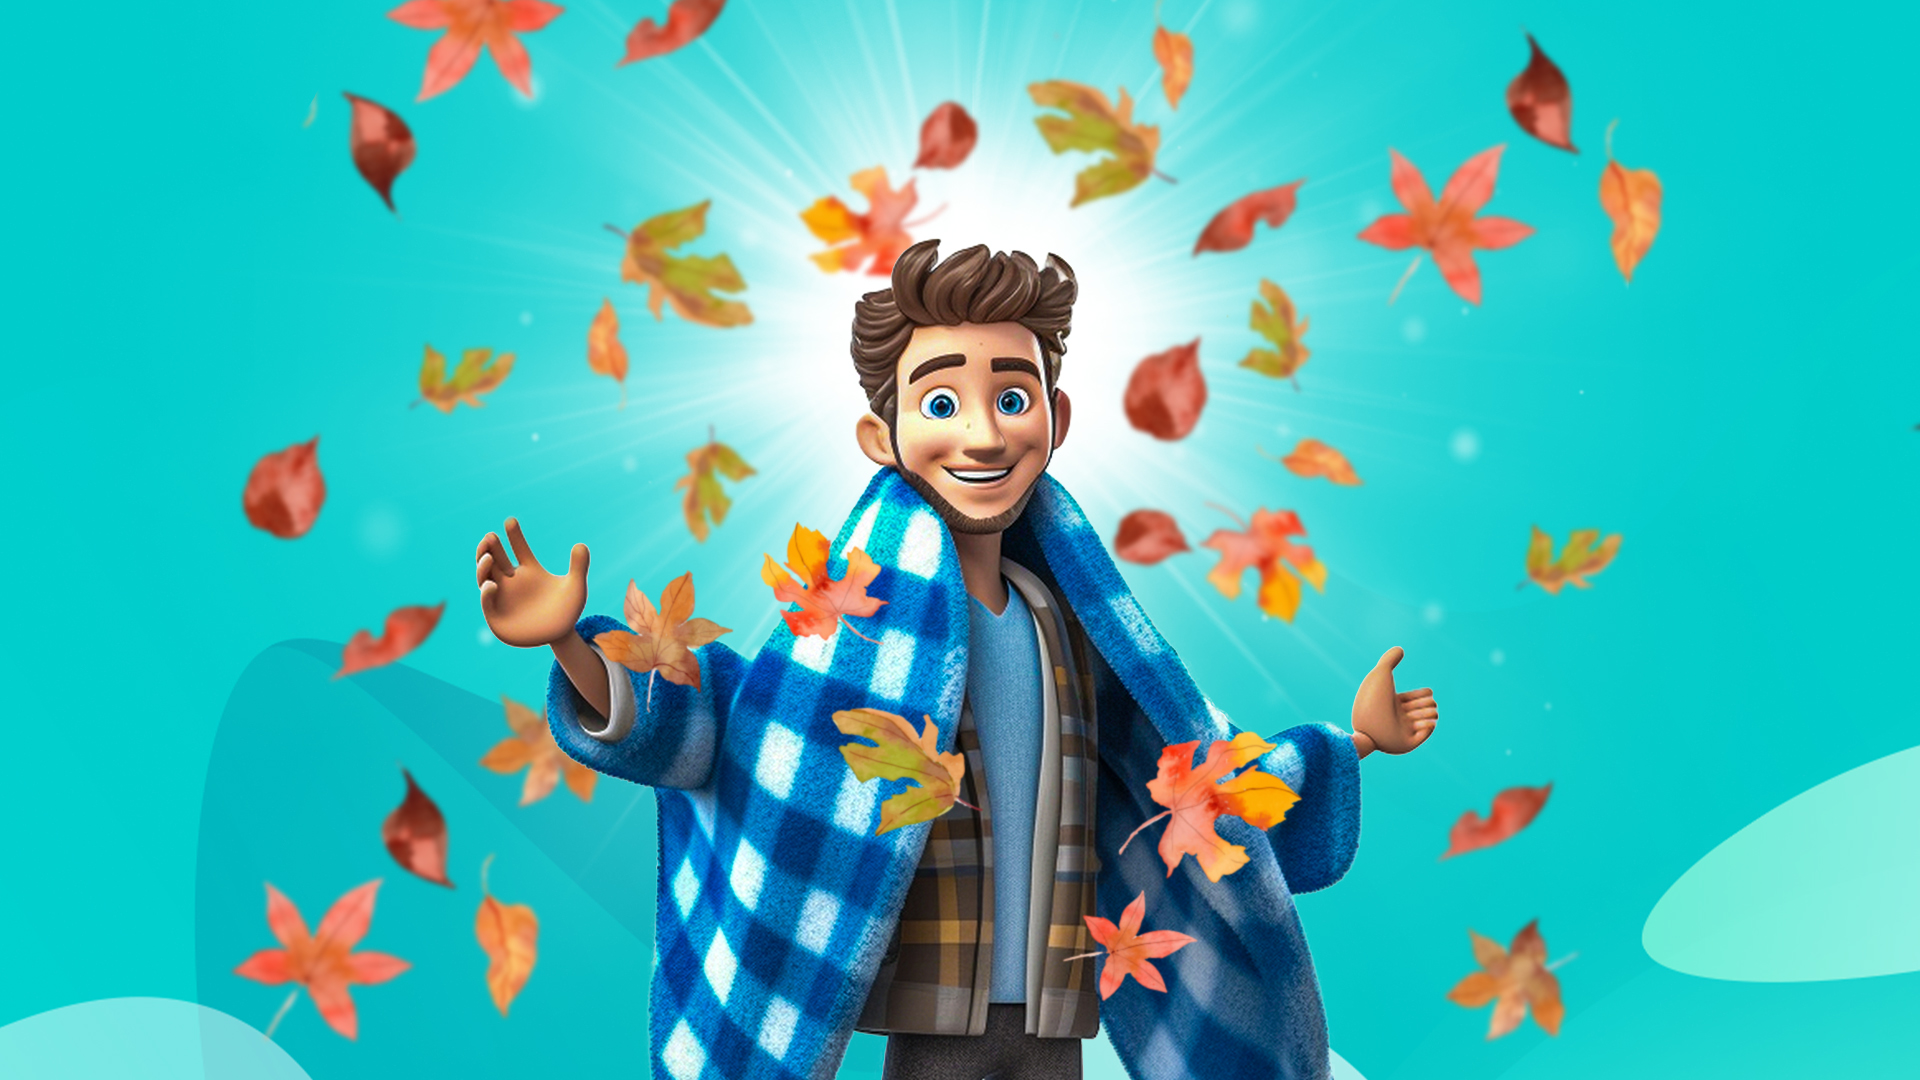 Cartoon man standing with a blue blanket surrounded by fall leaves, set against a teal background.